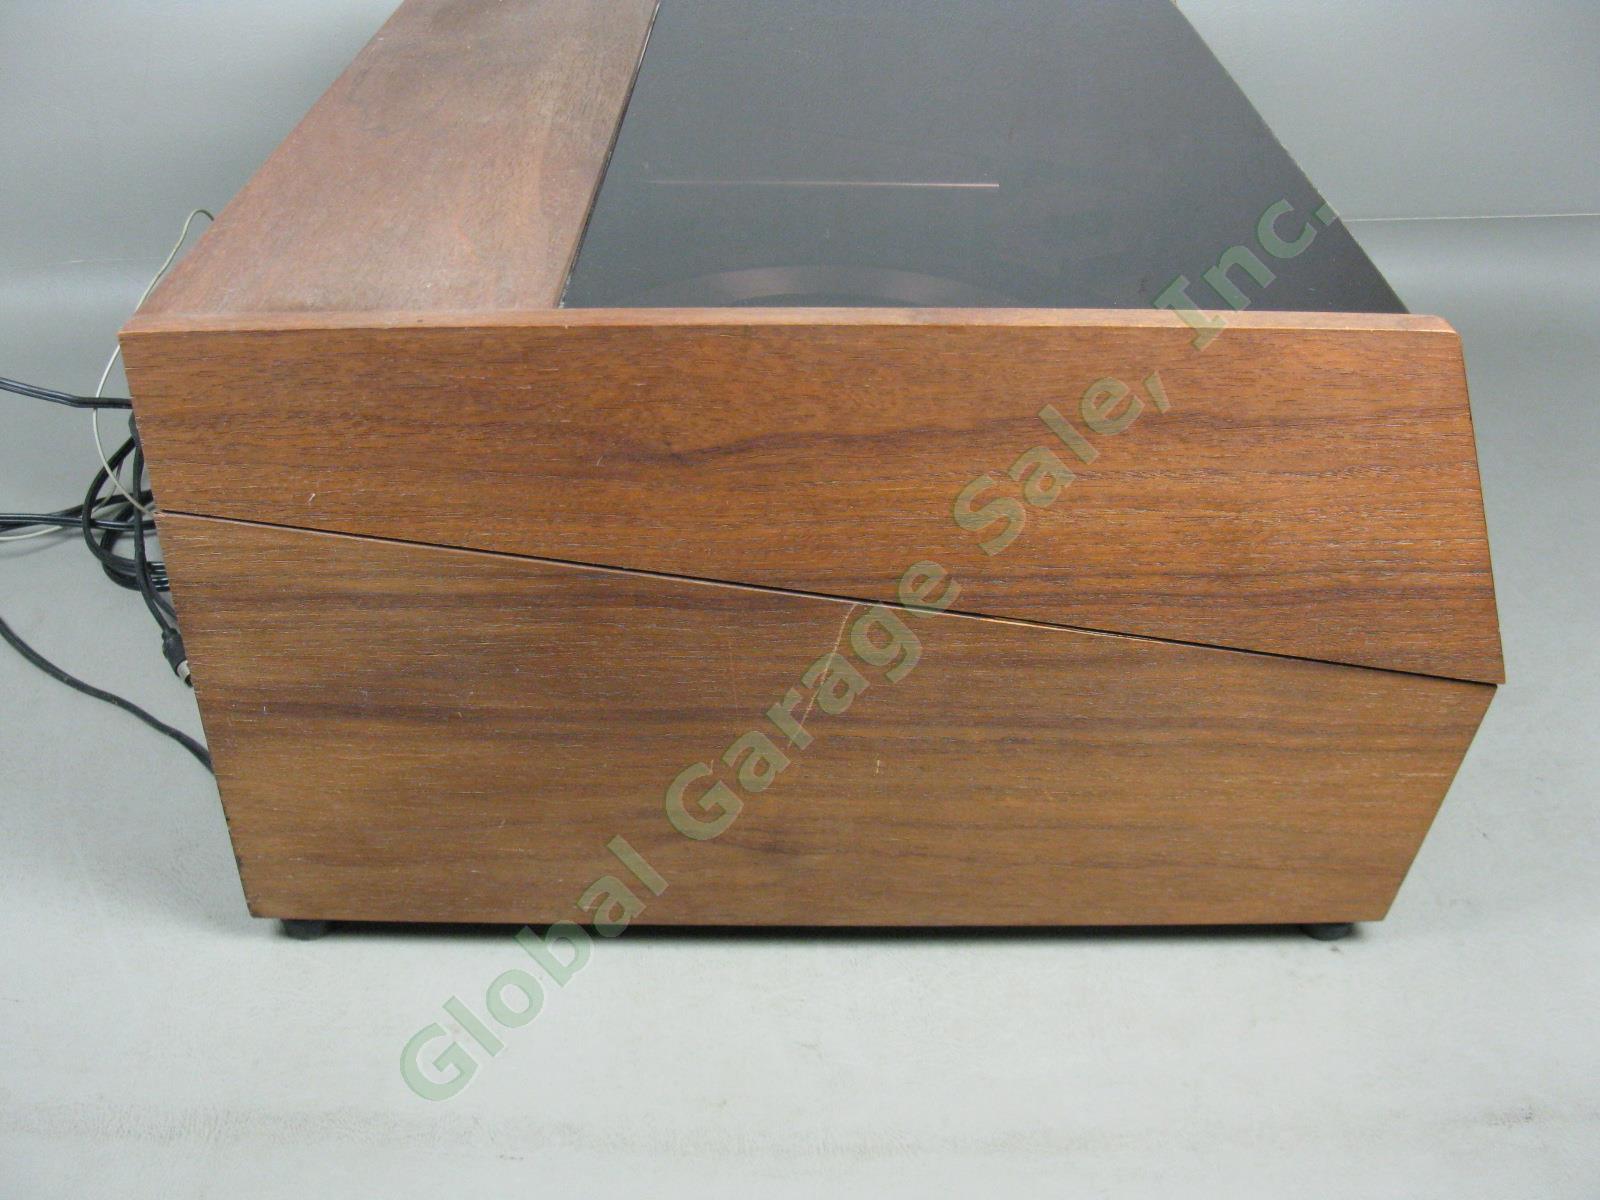 Vtg Dual 1219 Turntable + Wood Plinth Dust Cover Display Cabinet Case Manual Lot 8